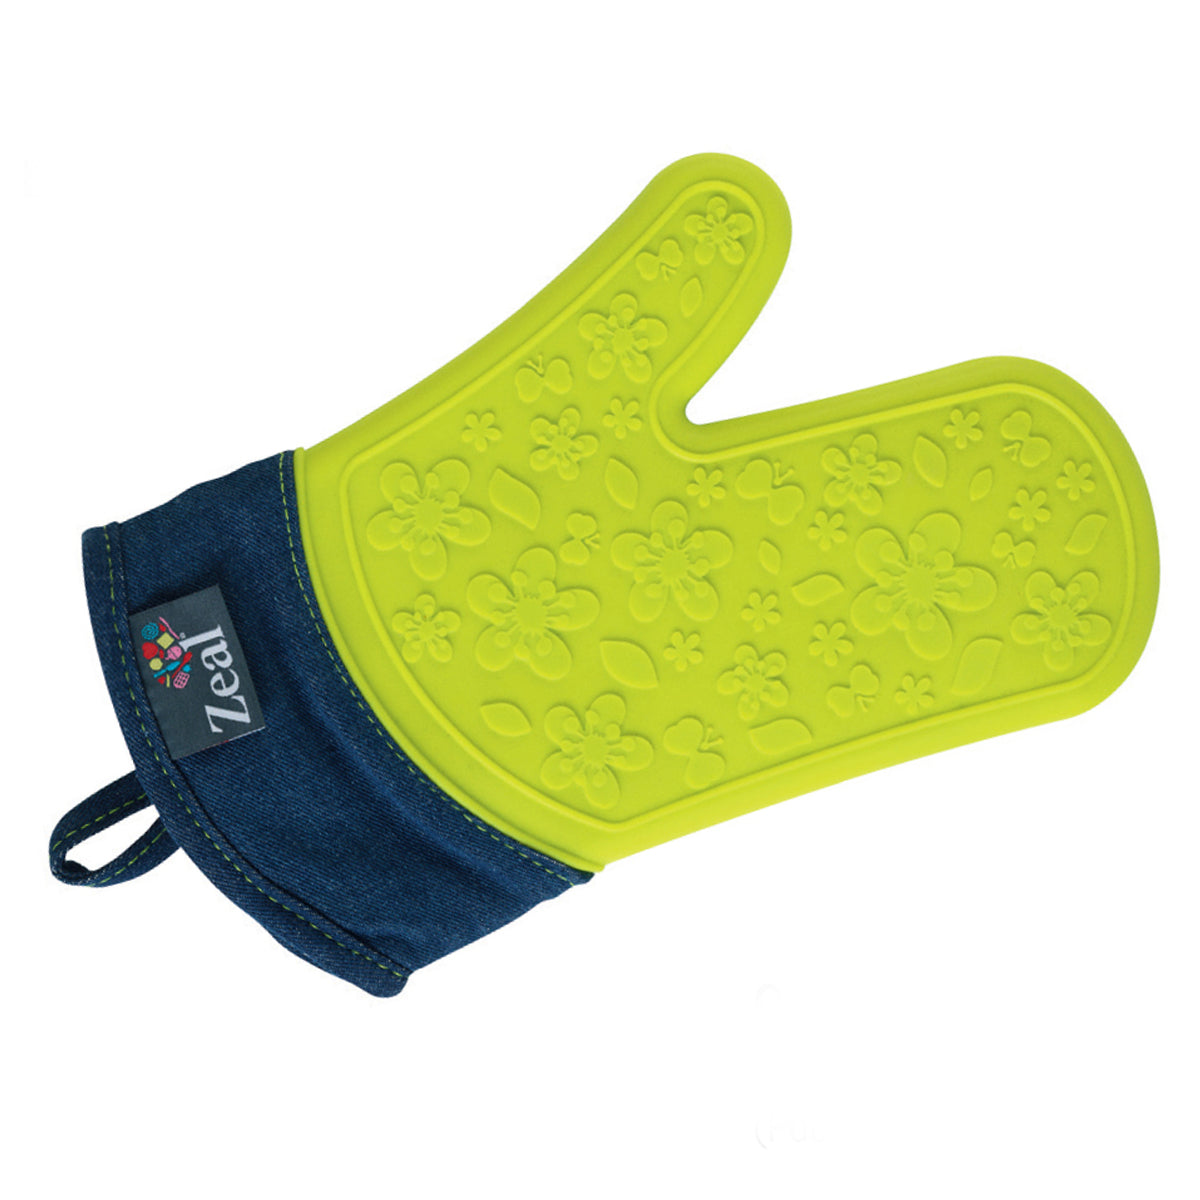 buy oven mitts & kitchen textiles at cheap rate in bulk. wholesale & retail kitchenware supplies store.